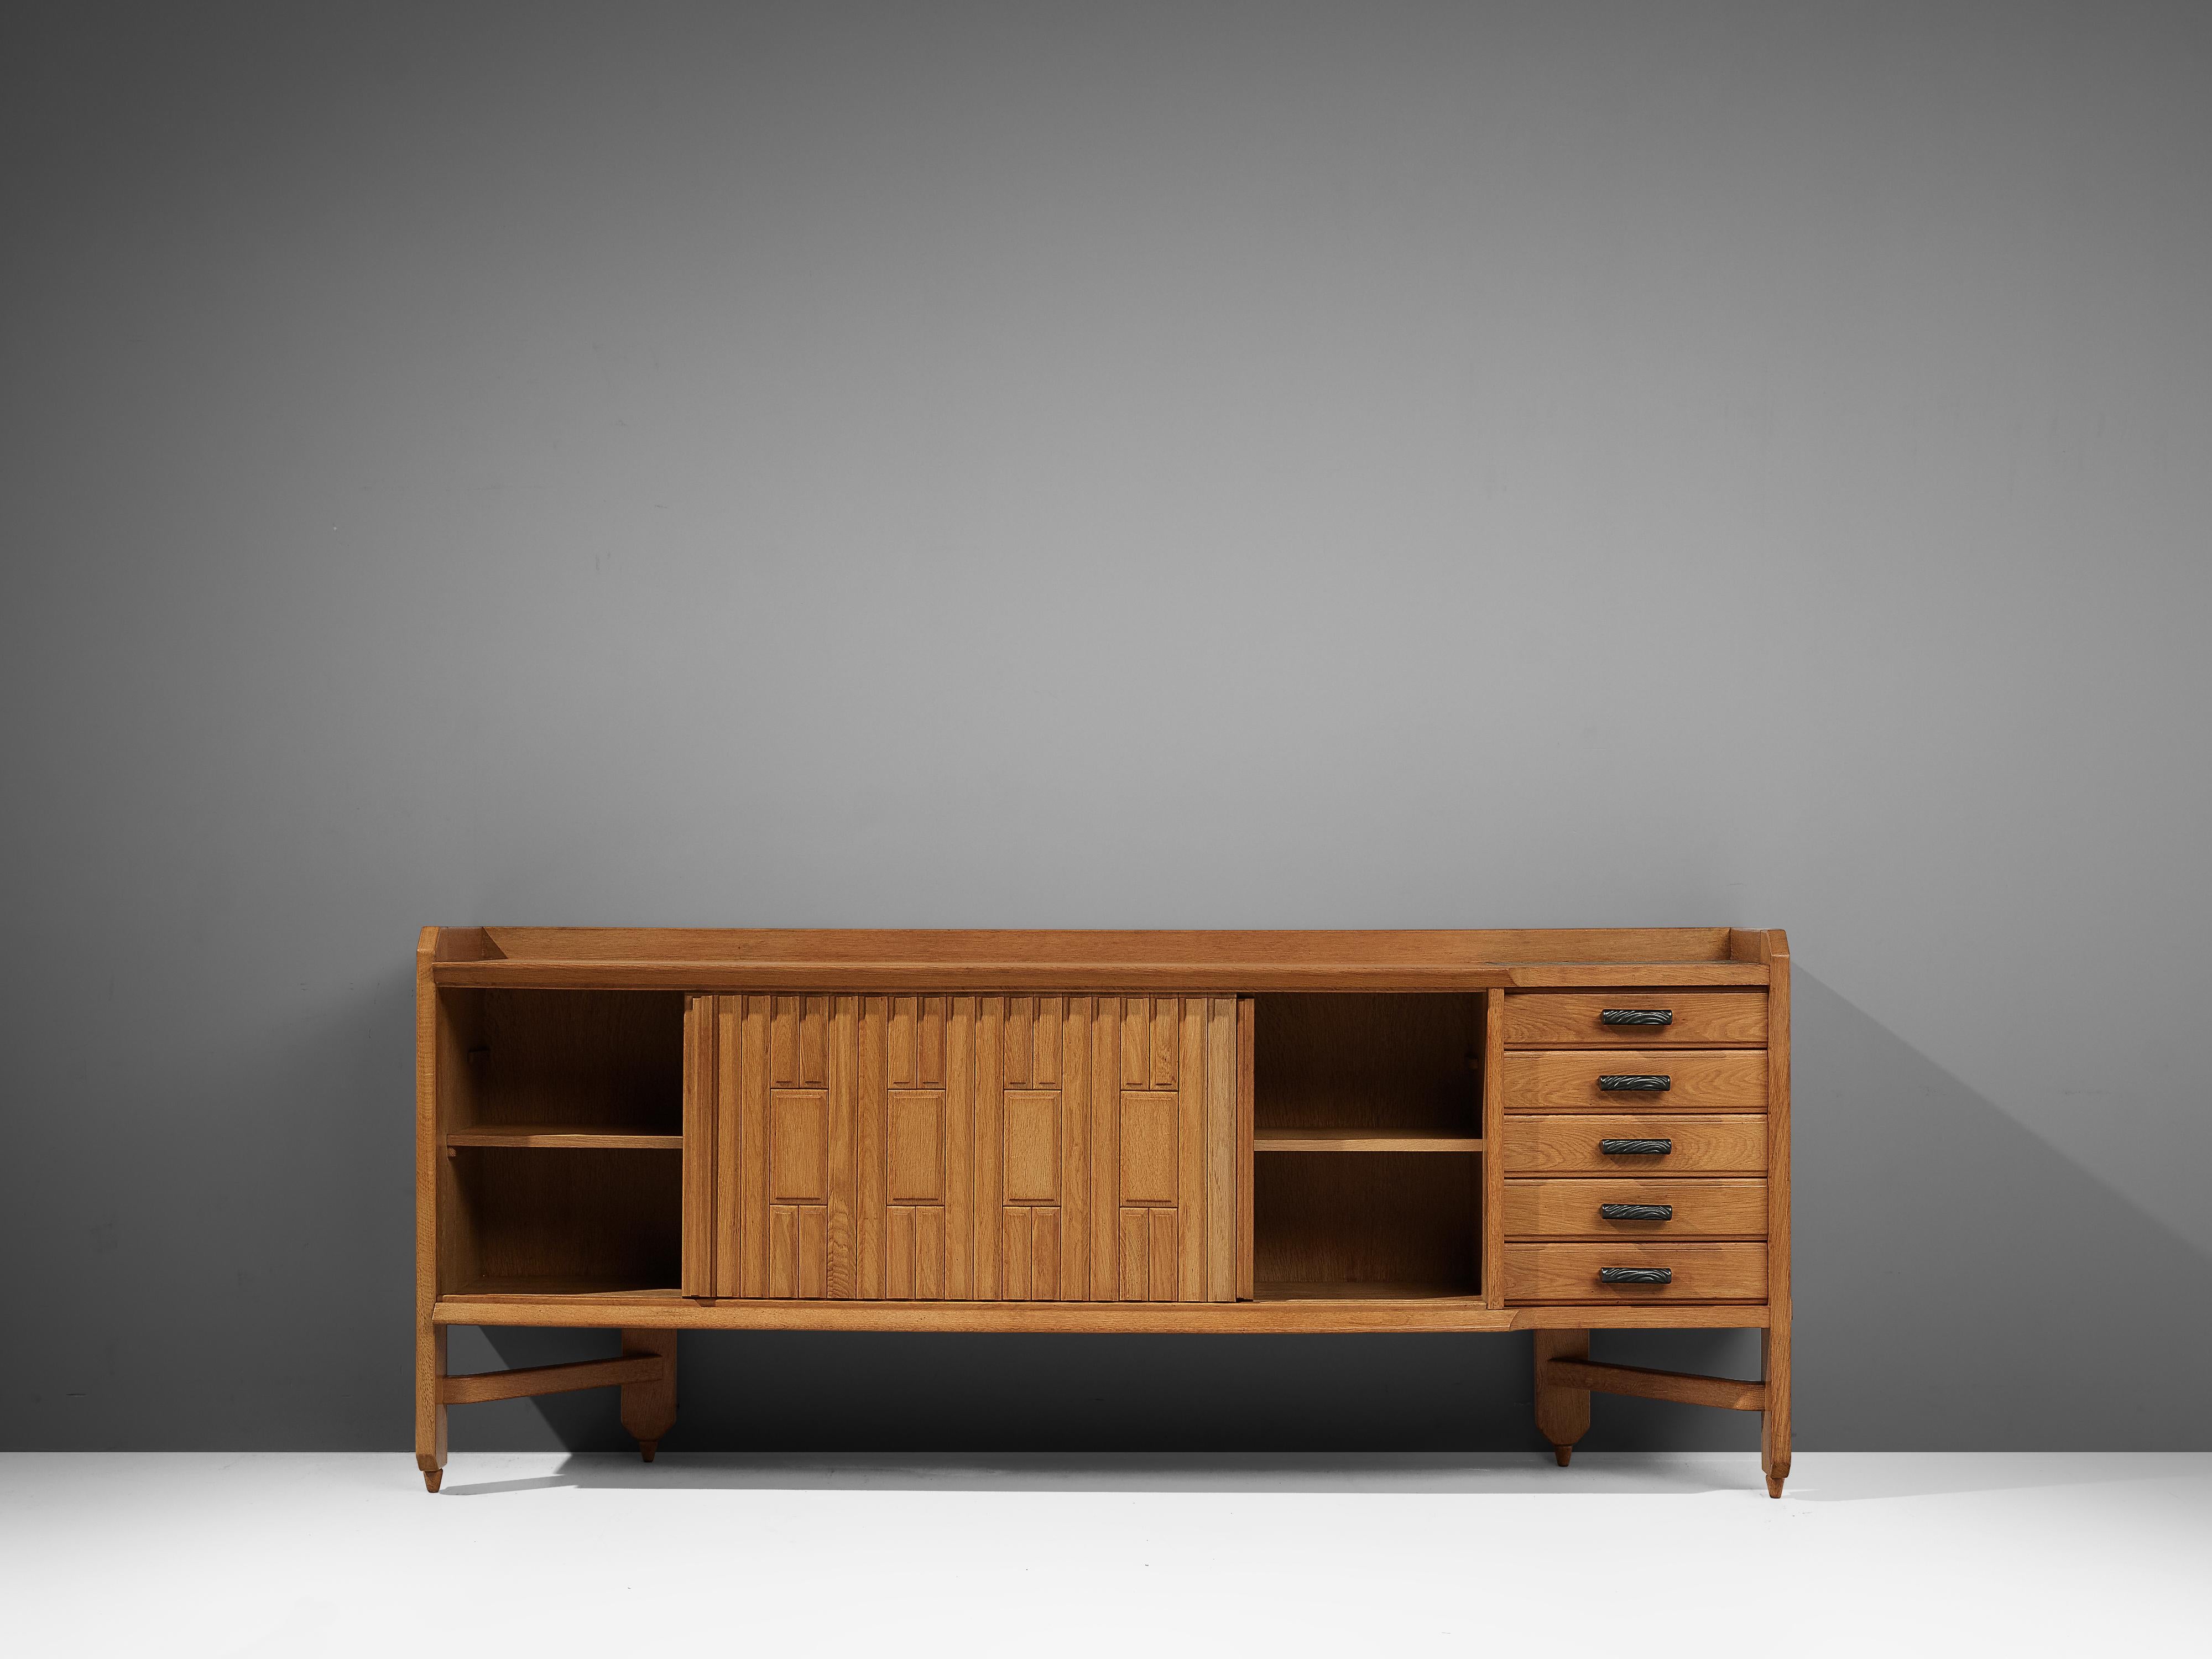 French Guillerme et Chambron Sideboard in Solid Oak with Ceramic Tiles